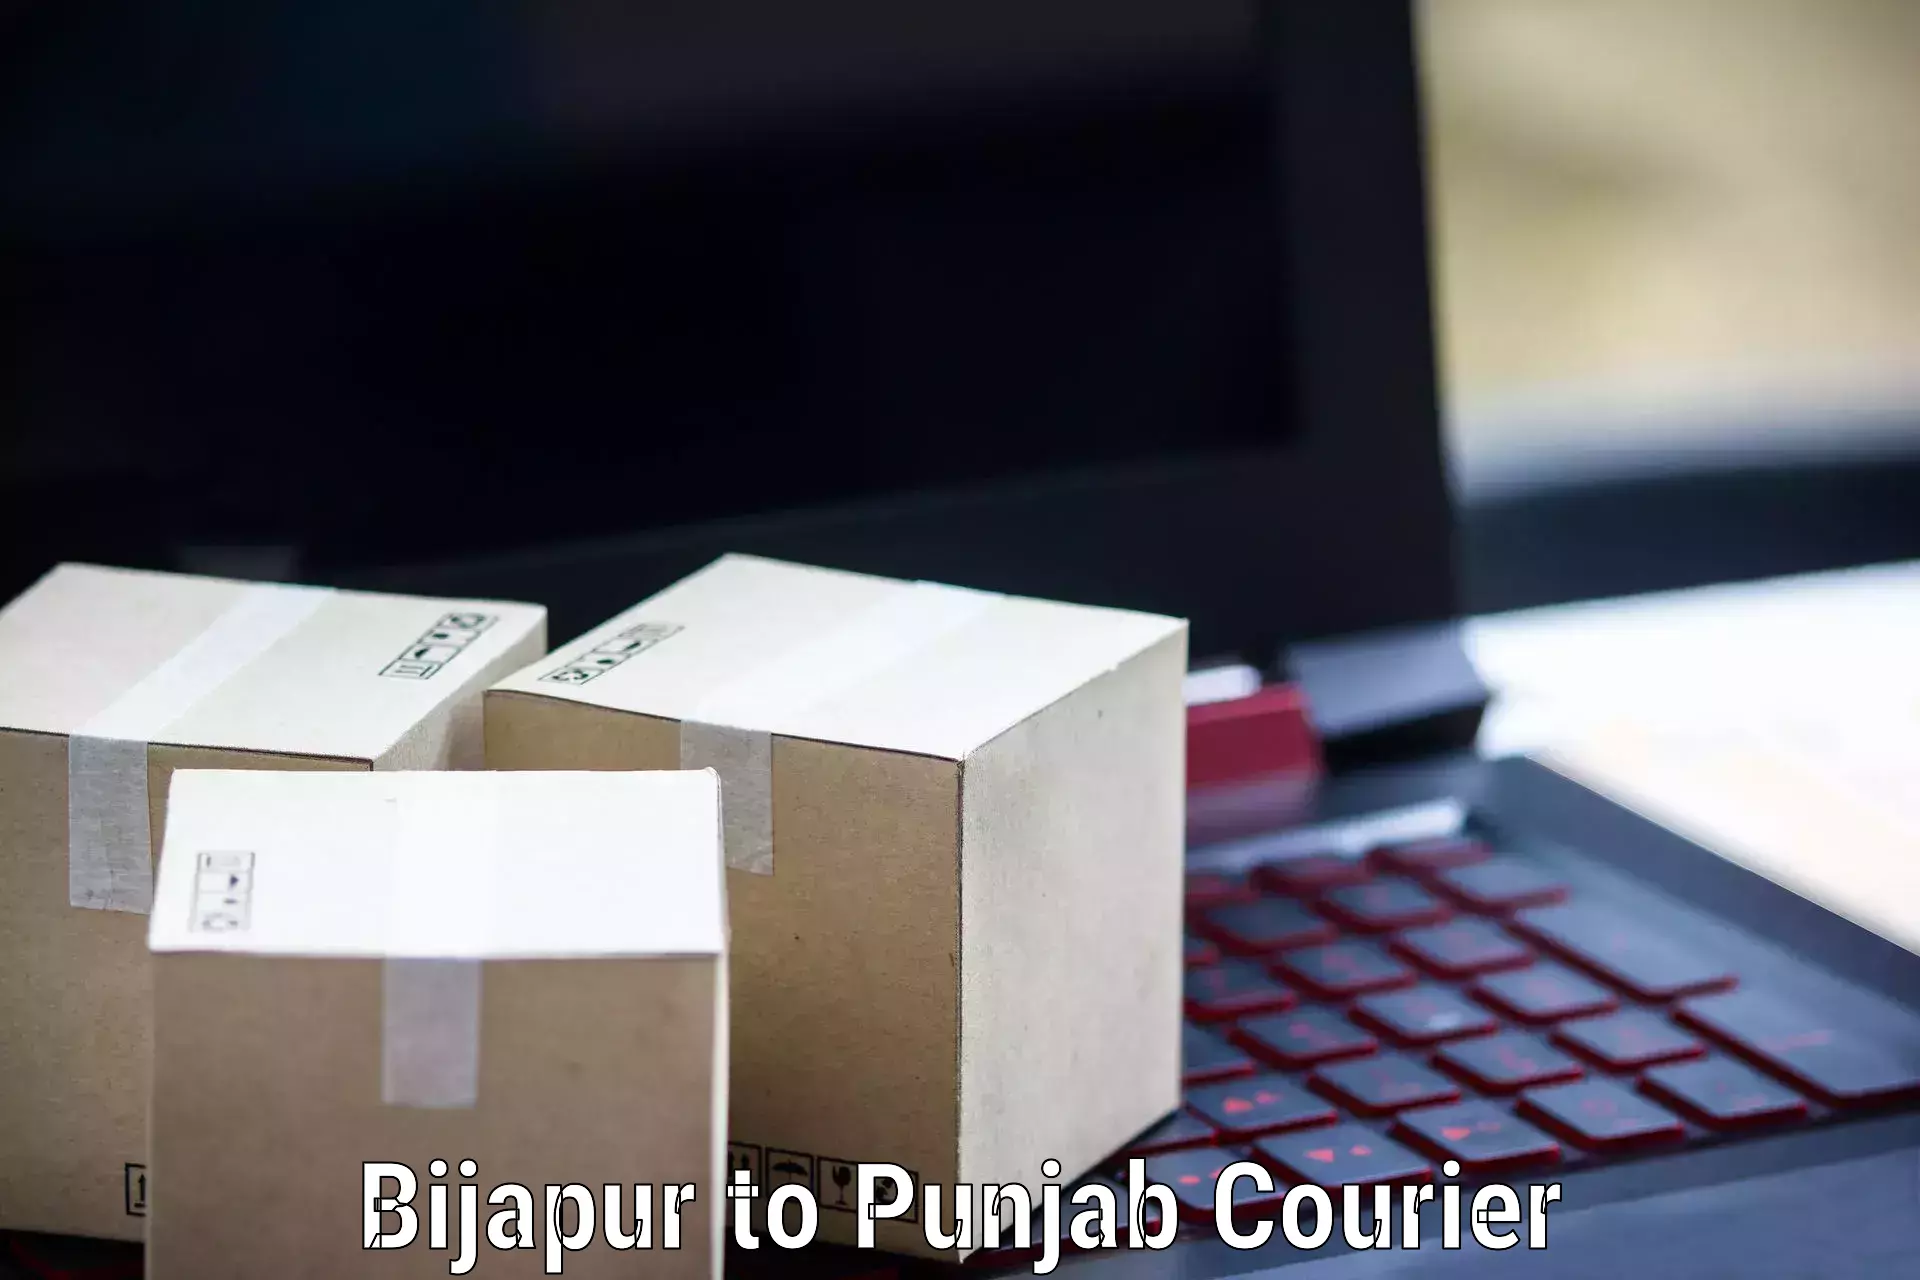 Same-day delivery solutions Bijapur to Nawanshahr